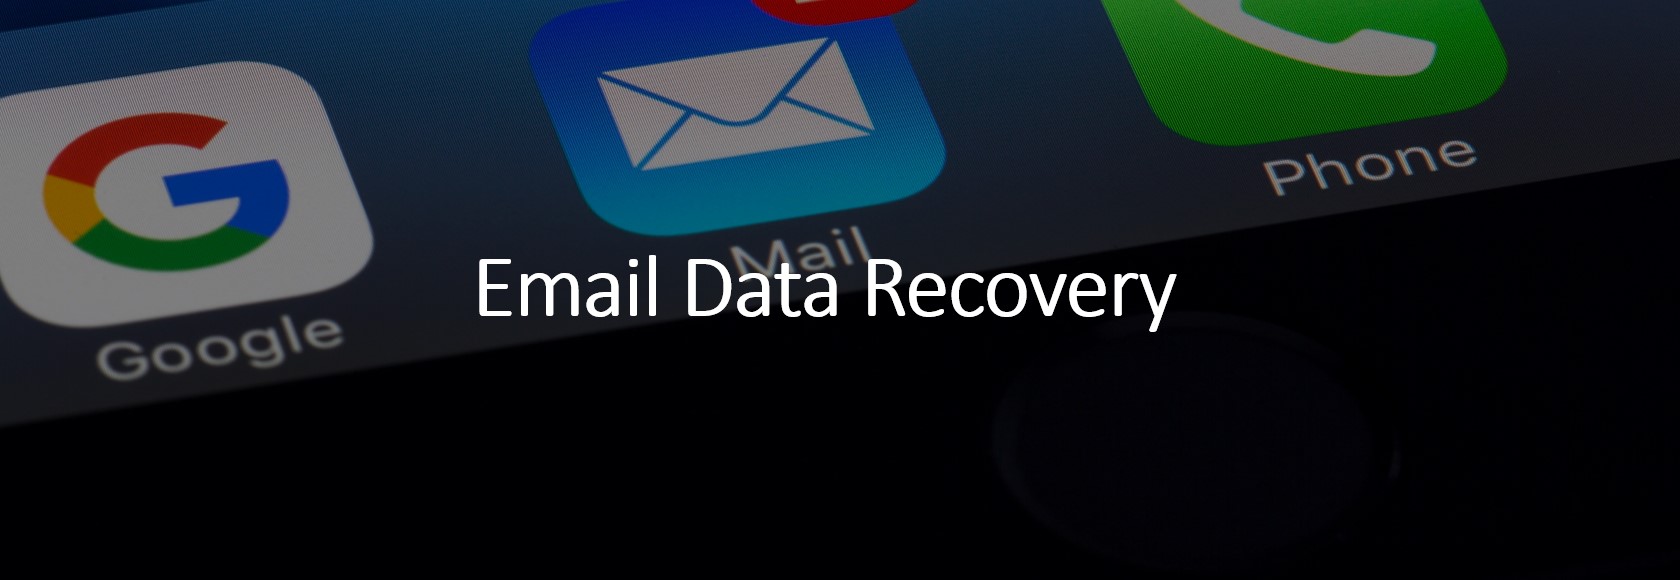 Email Data Recovery